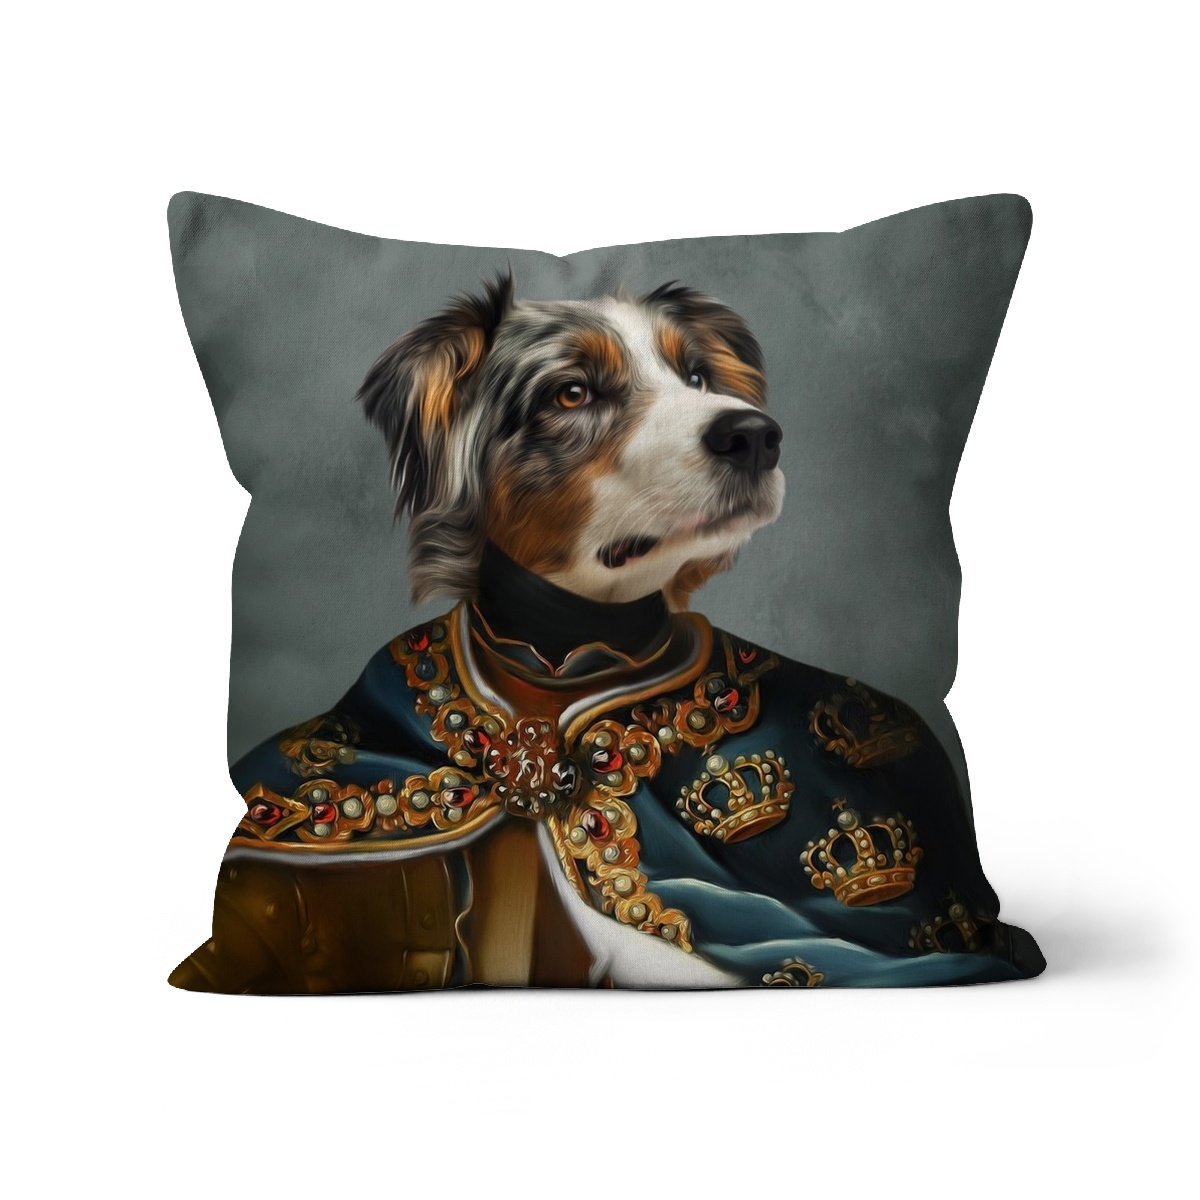 The Royal Knight: Custom Pet Throw Pillow - Paw & Glory - #pet portraits# - #dog portraits# - #pet portraits uk#paw & glory, custom pet portrait pillow,pet face pillow, custom cat pillows, pet pillow, custom pillow of pet, personalised cat pillow